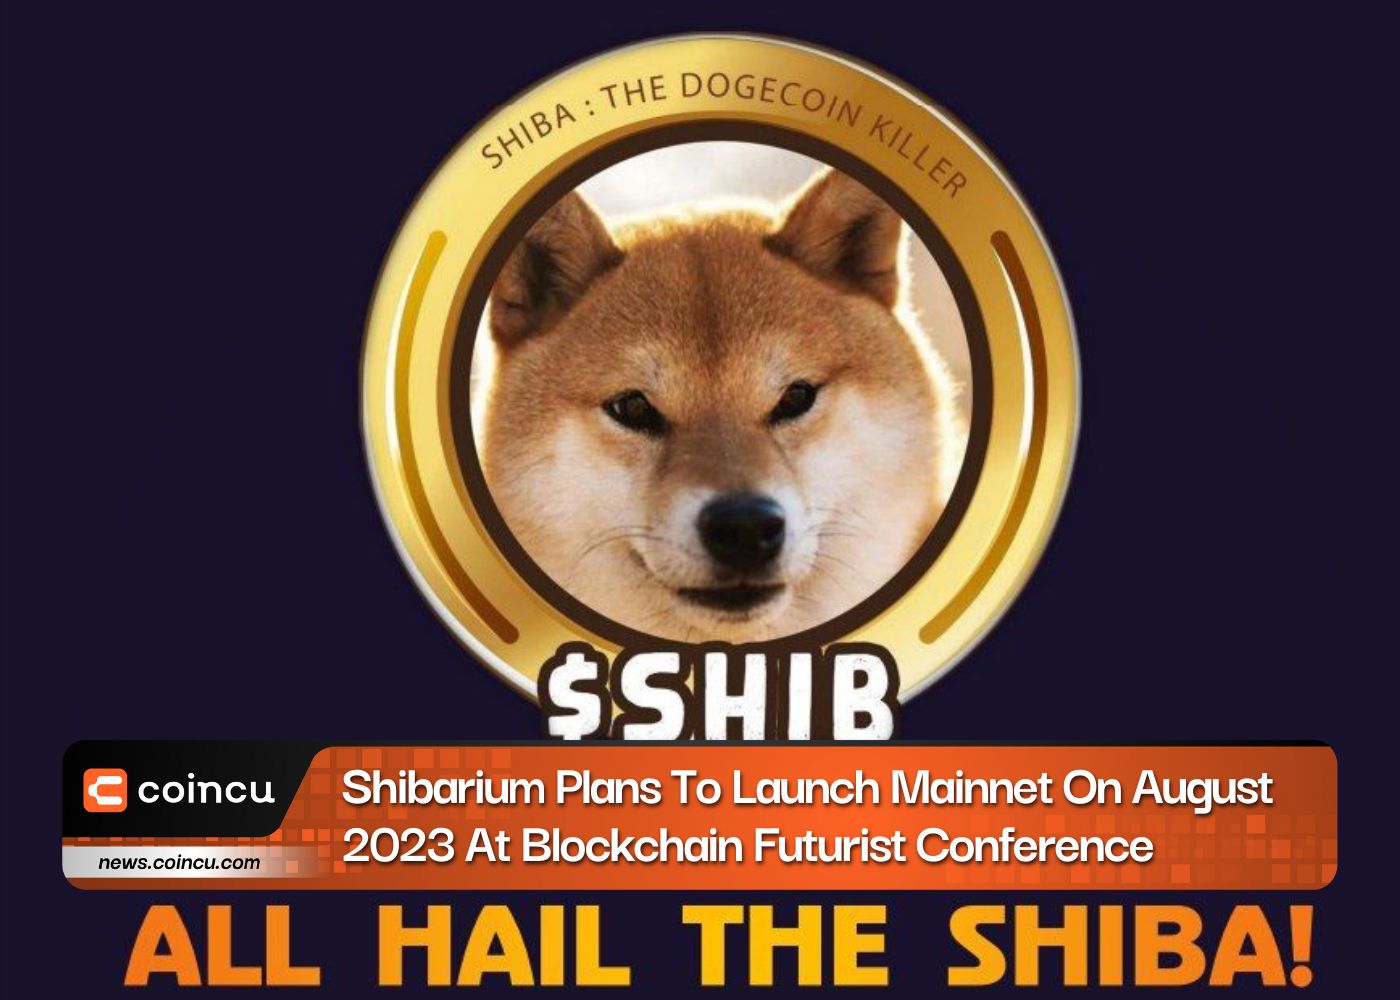 Shibarium Plans To Launch Mainnet On August 2023 At Blockchain Futurist Conference